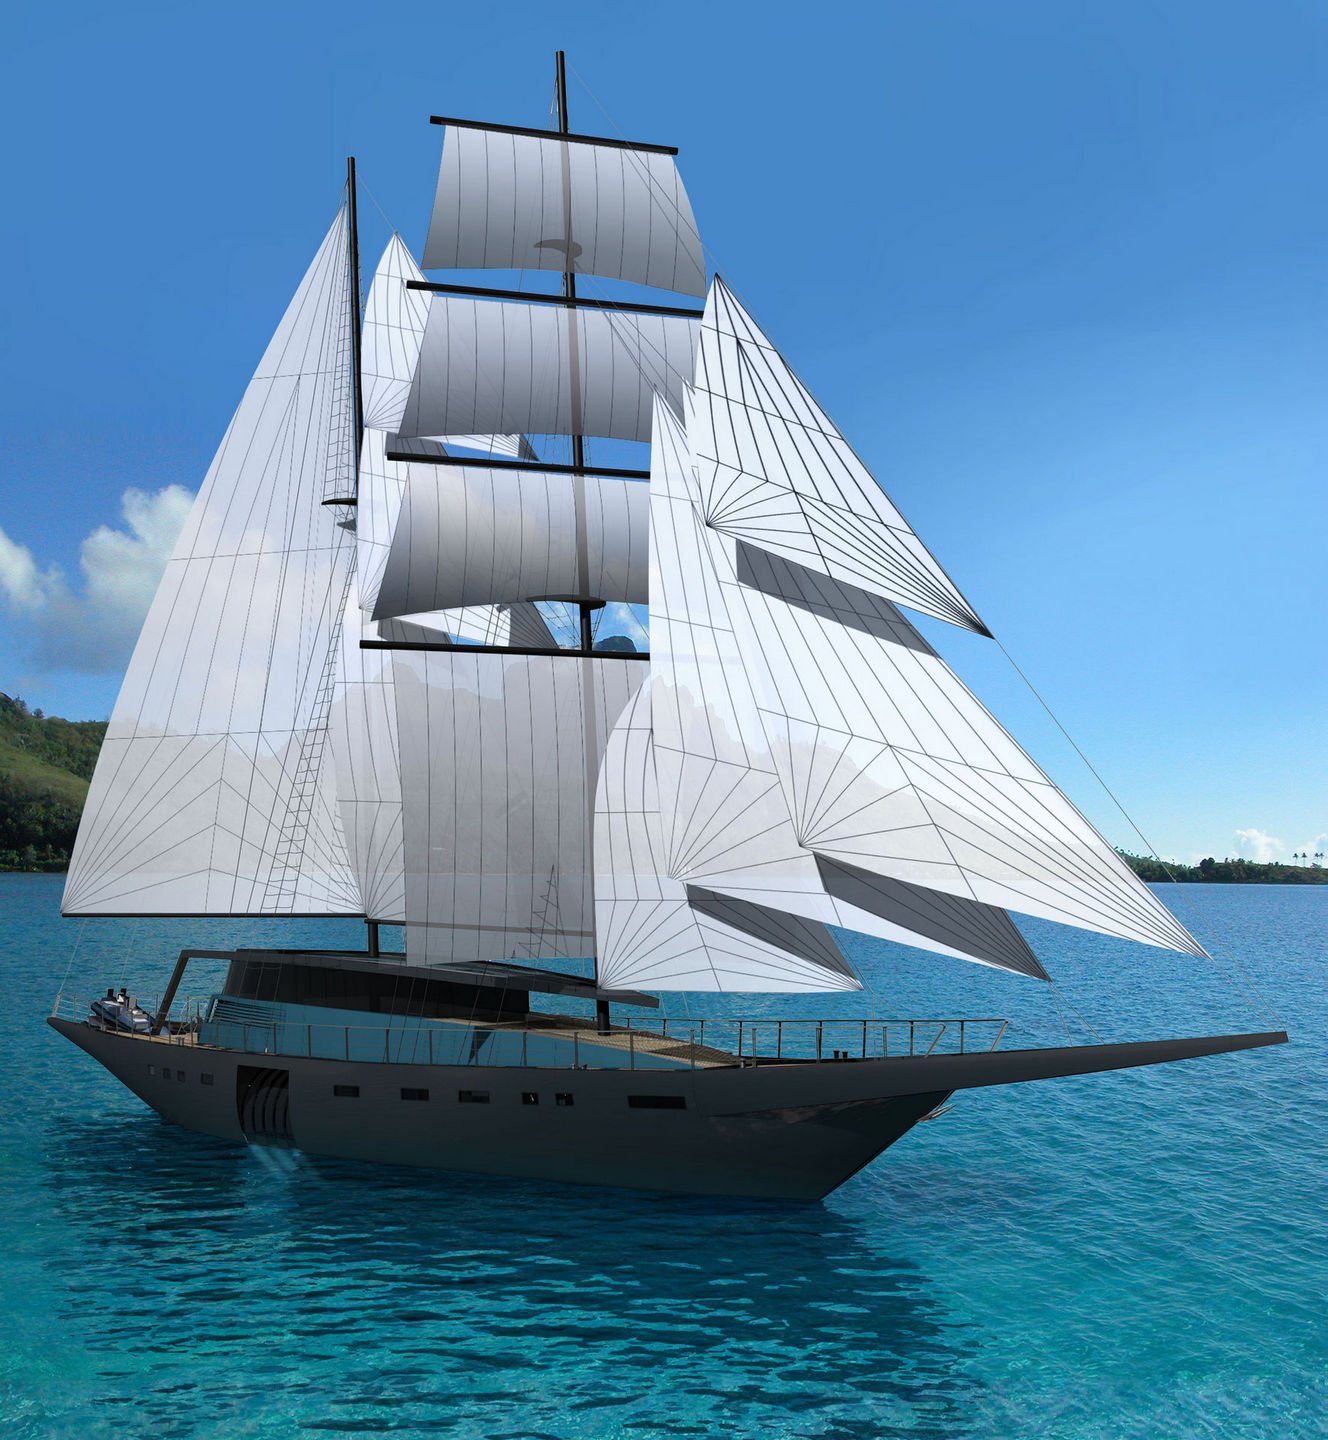 Sea 7 Design Tropical Sailing yacht for diving exterior design, a silhouette with white sails